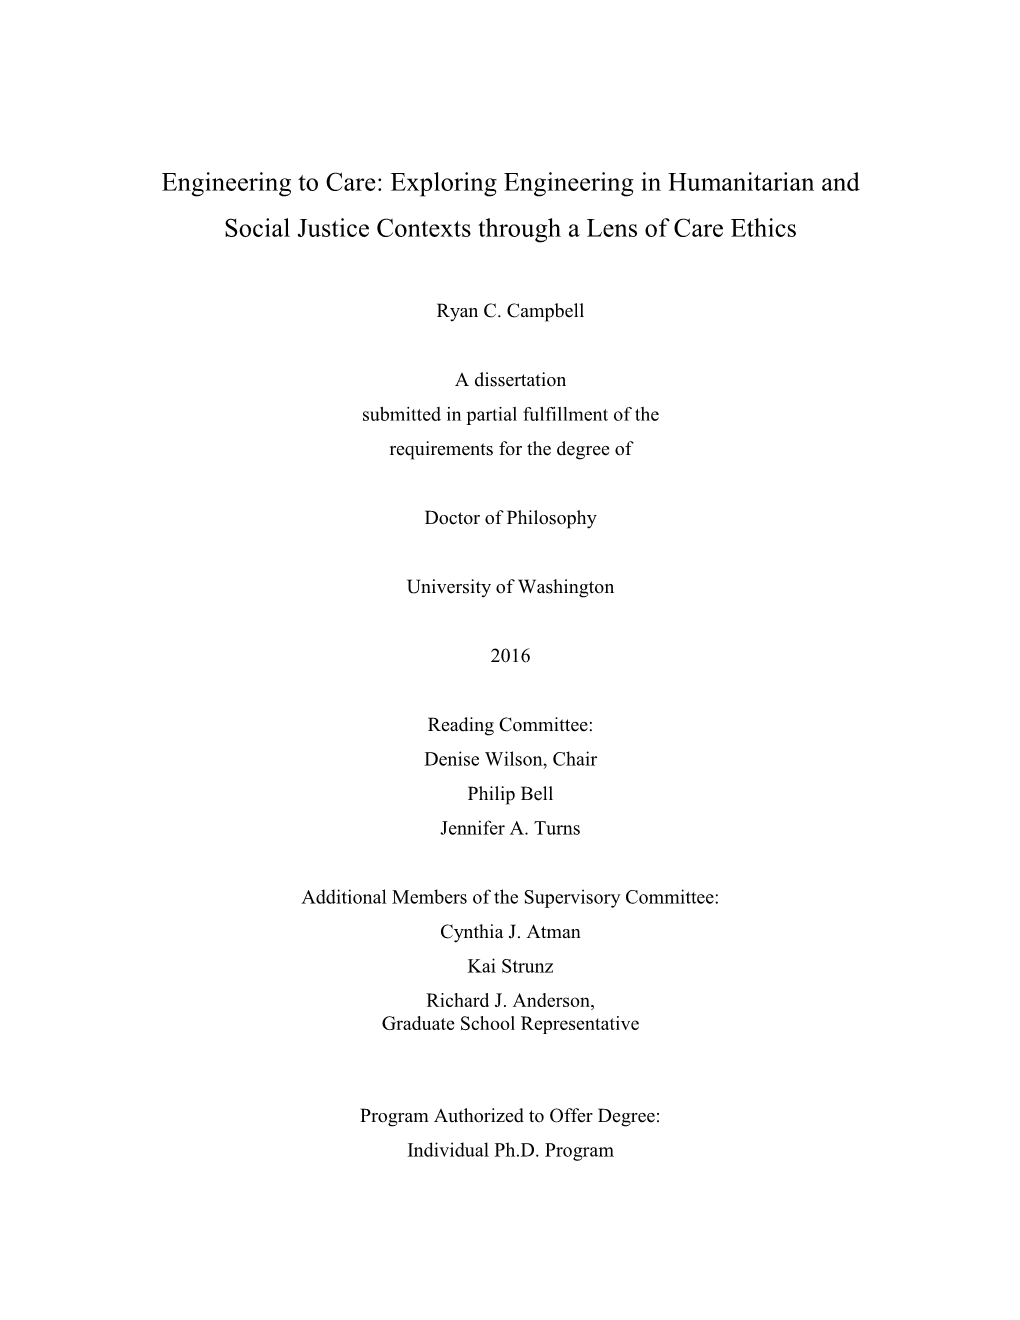 Engineering to Care: Exploring Engineering in Humanitarian and Social Justice Contexts Through a Lens of Care Ethics